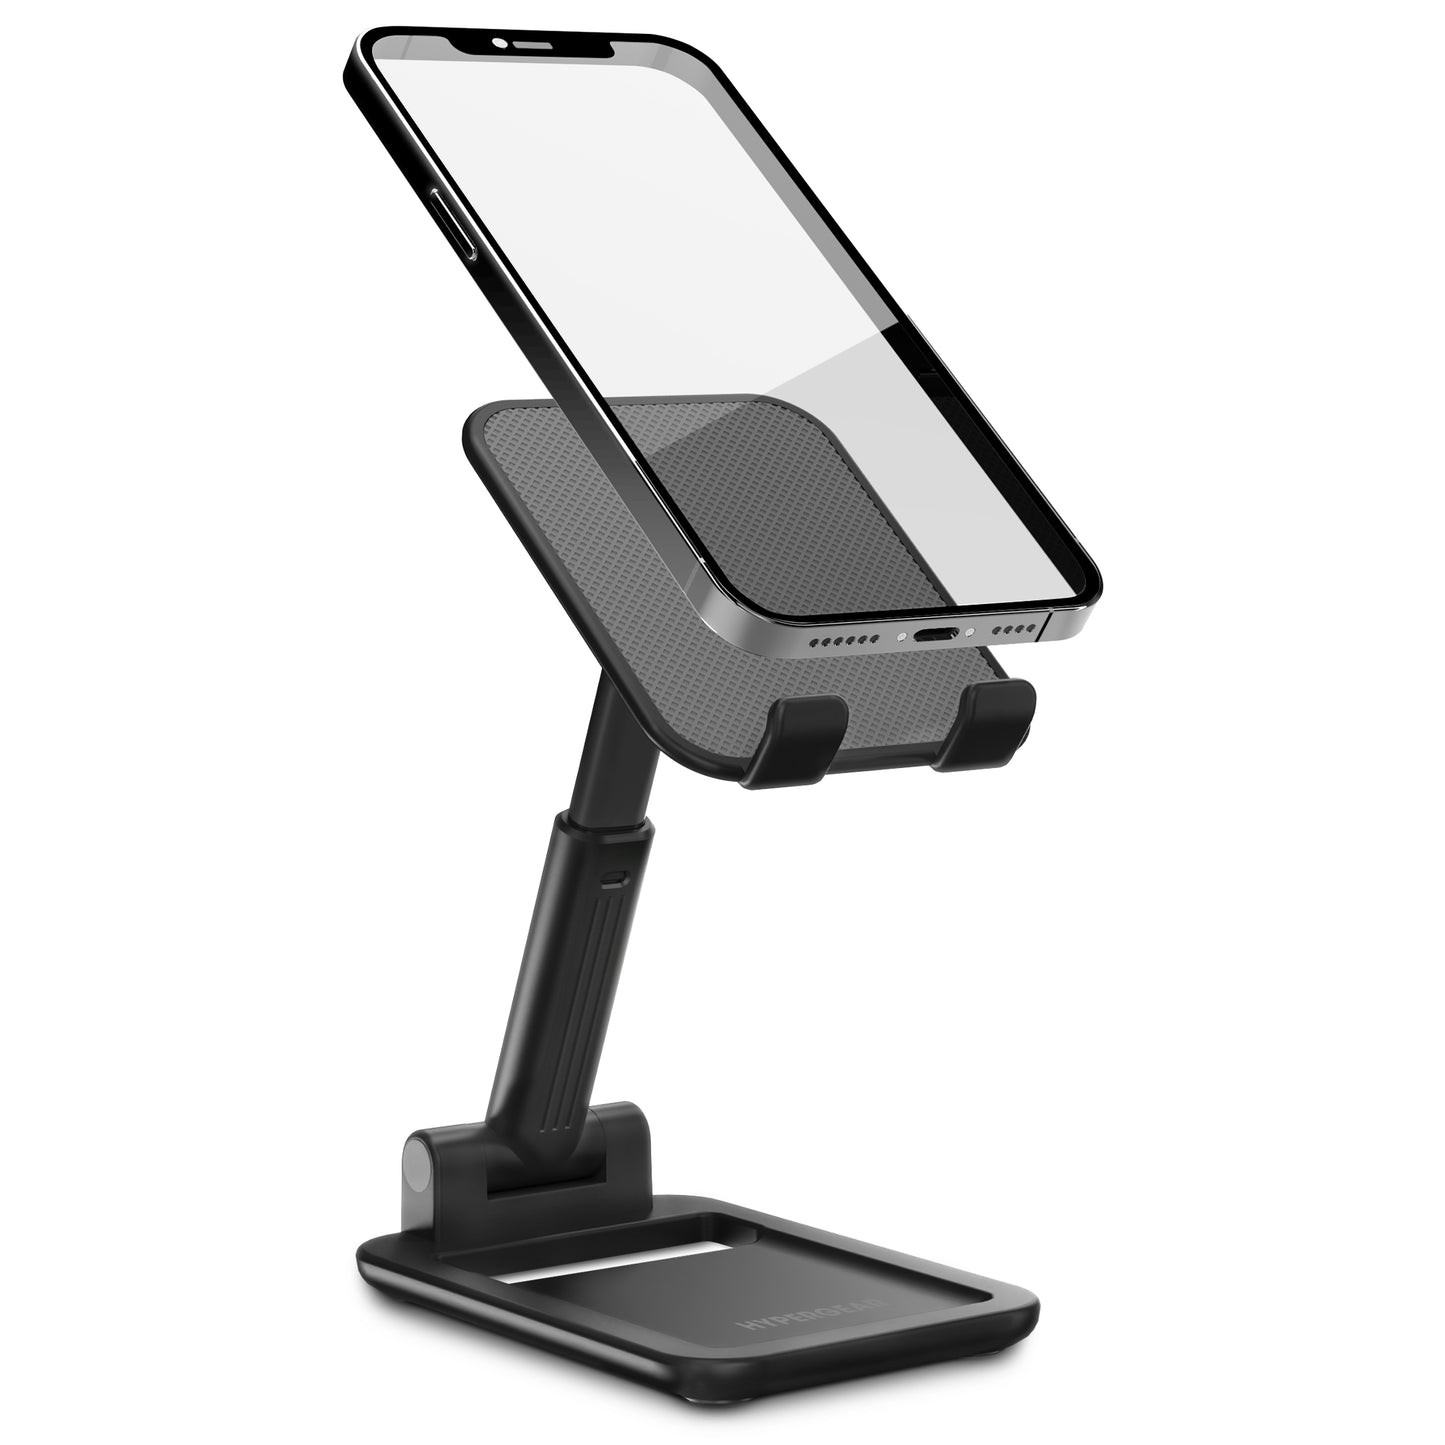 Portable Universal stand